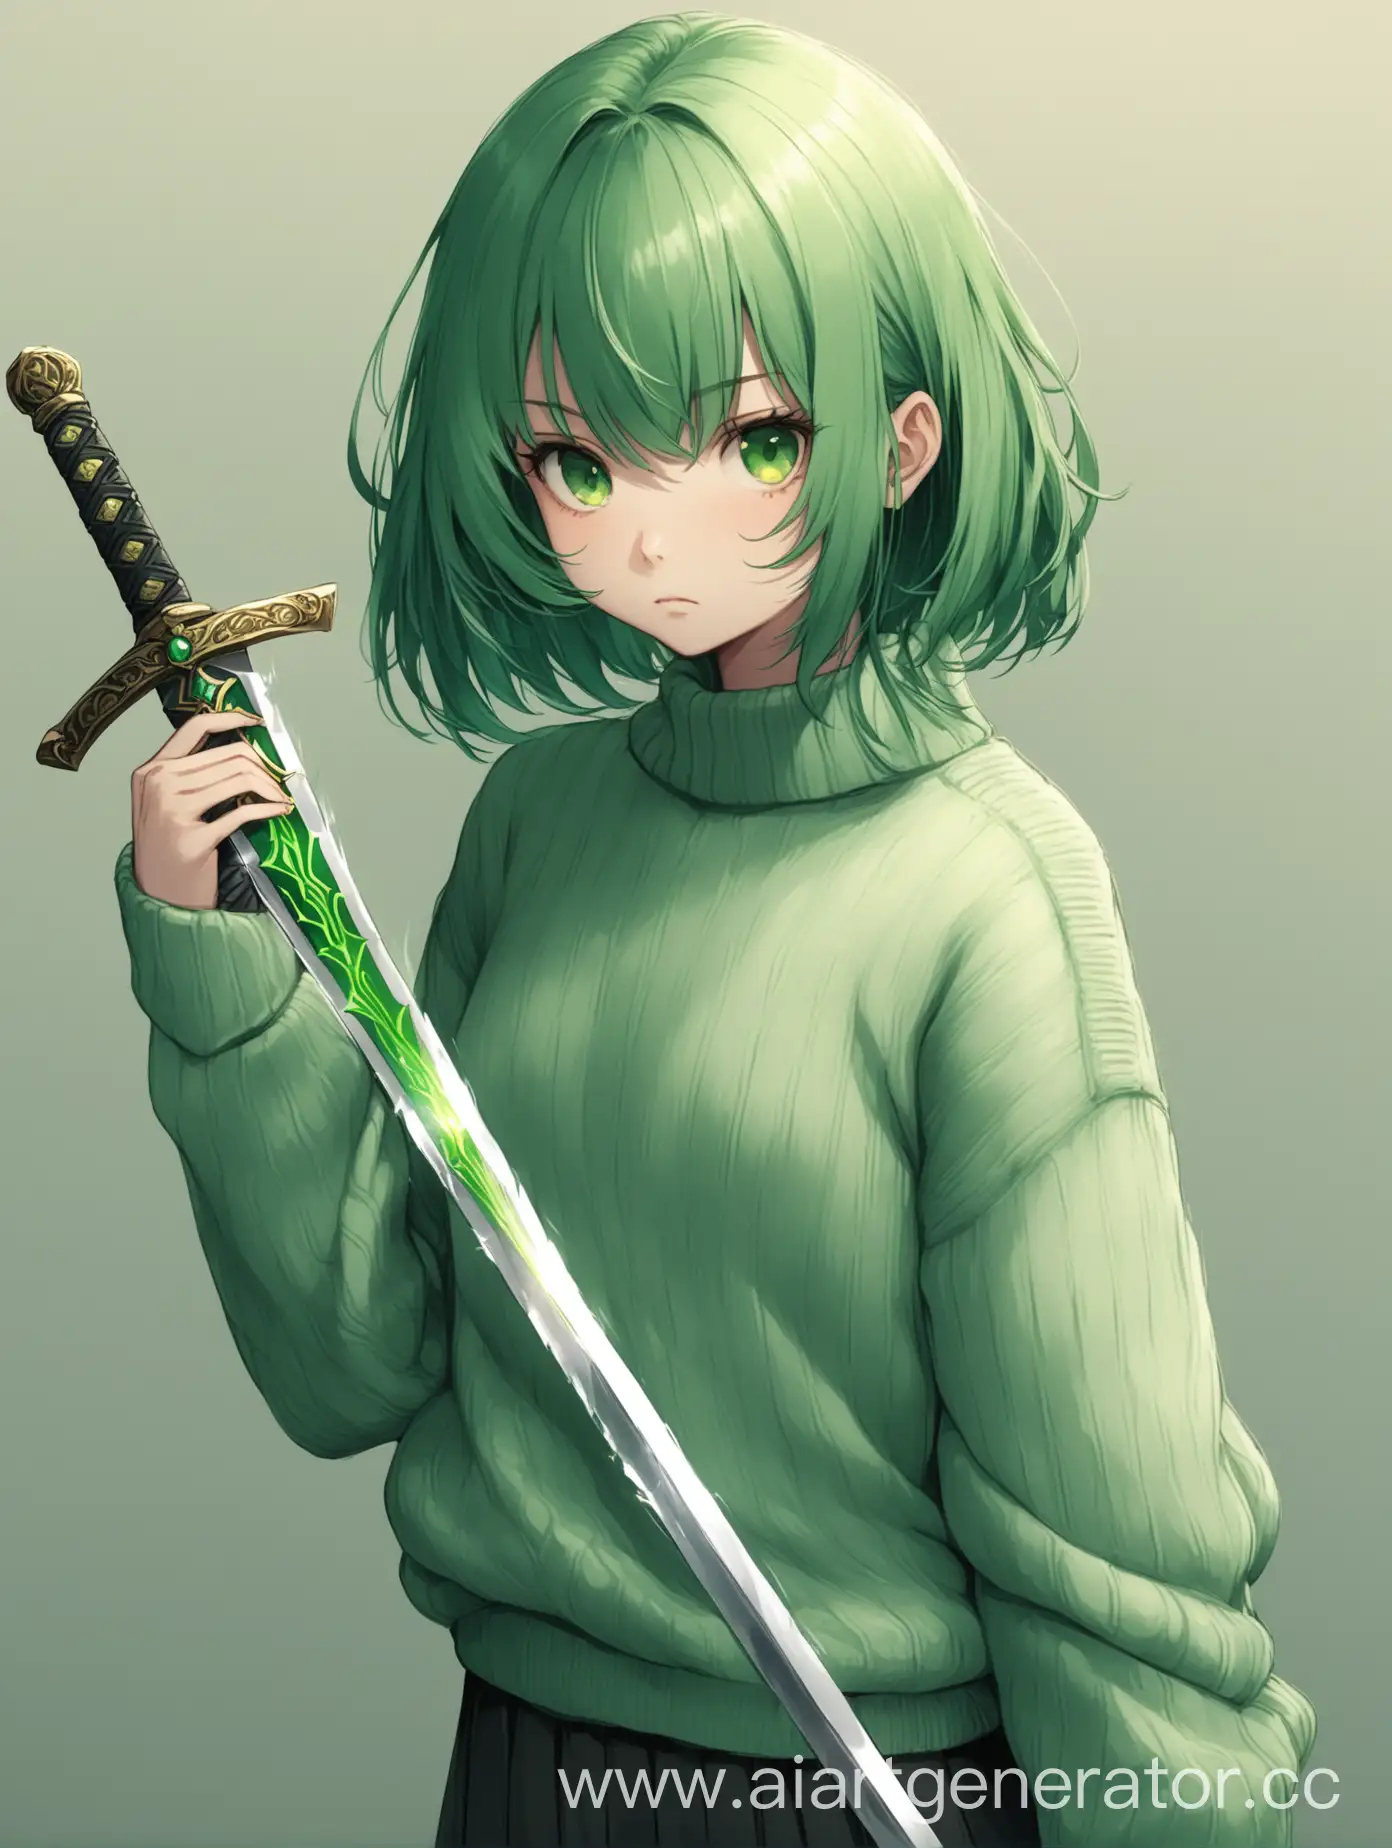 A girl with green hair and a sweater with a sword